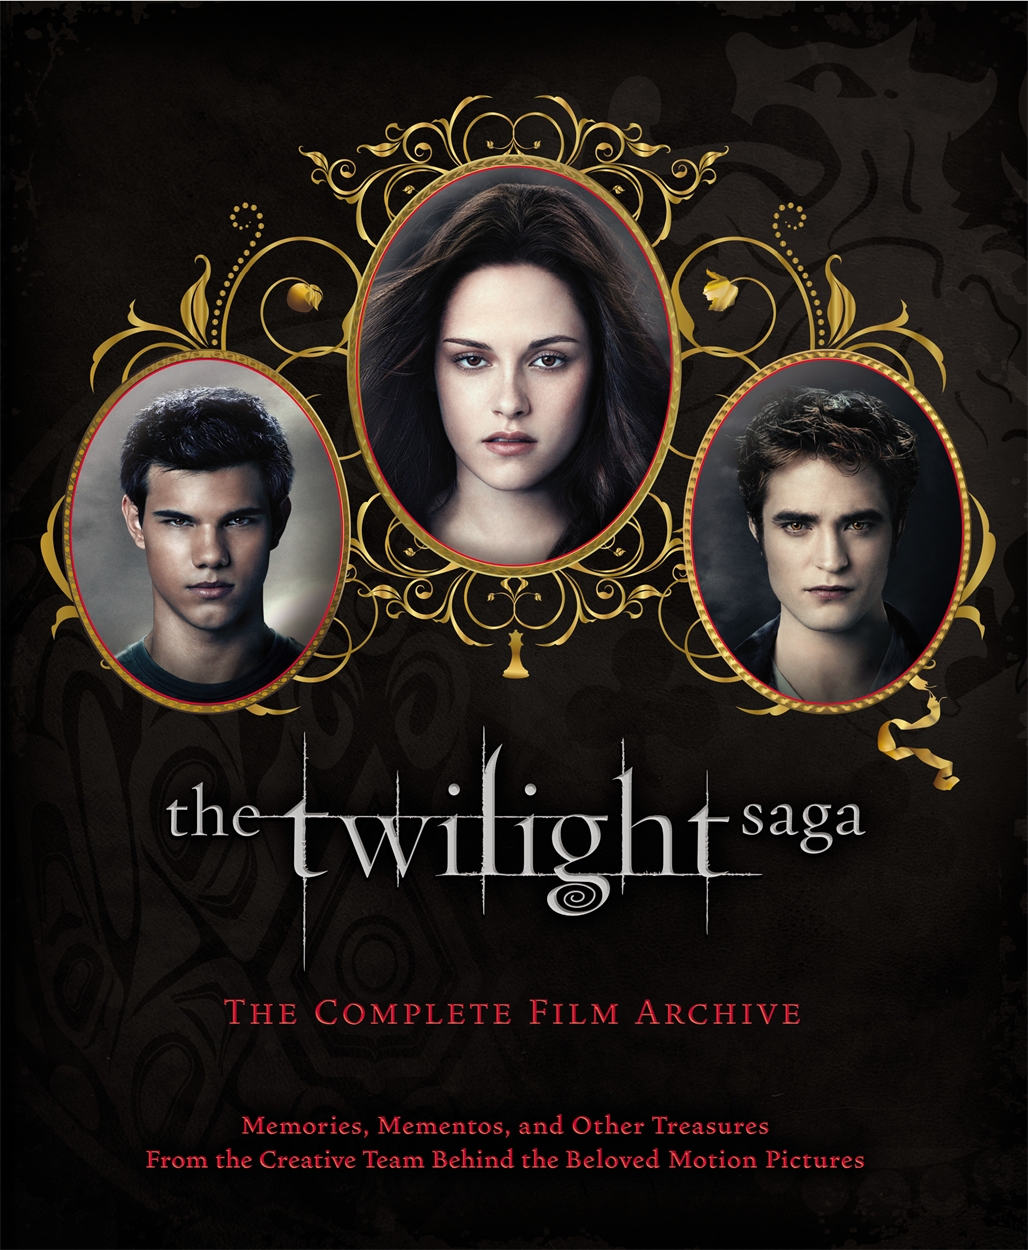 The Twilight Saga: The Complete Film Archive by Robert Abele | Hachette UK